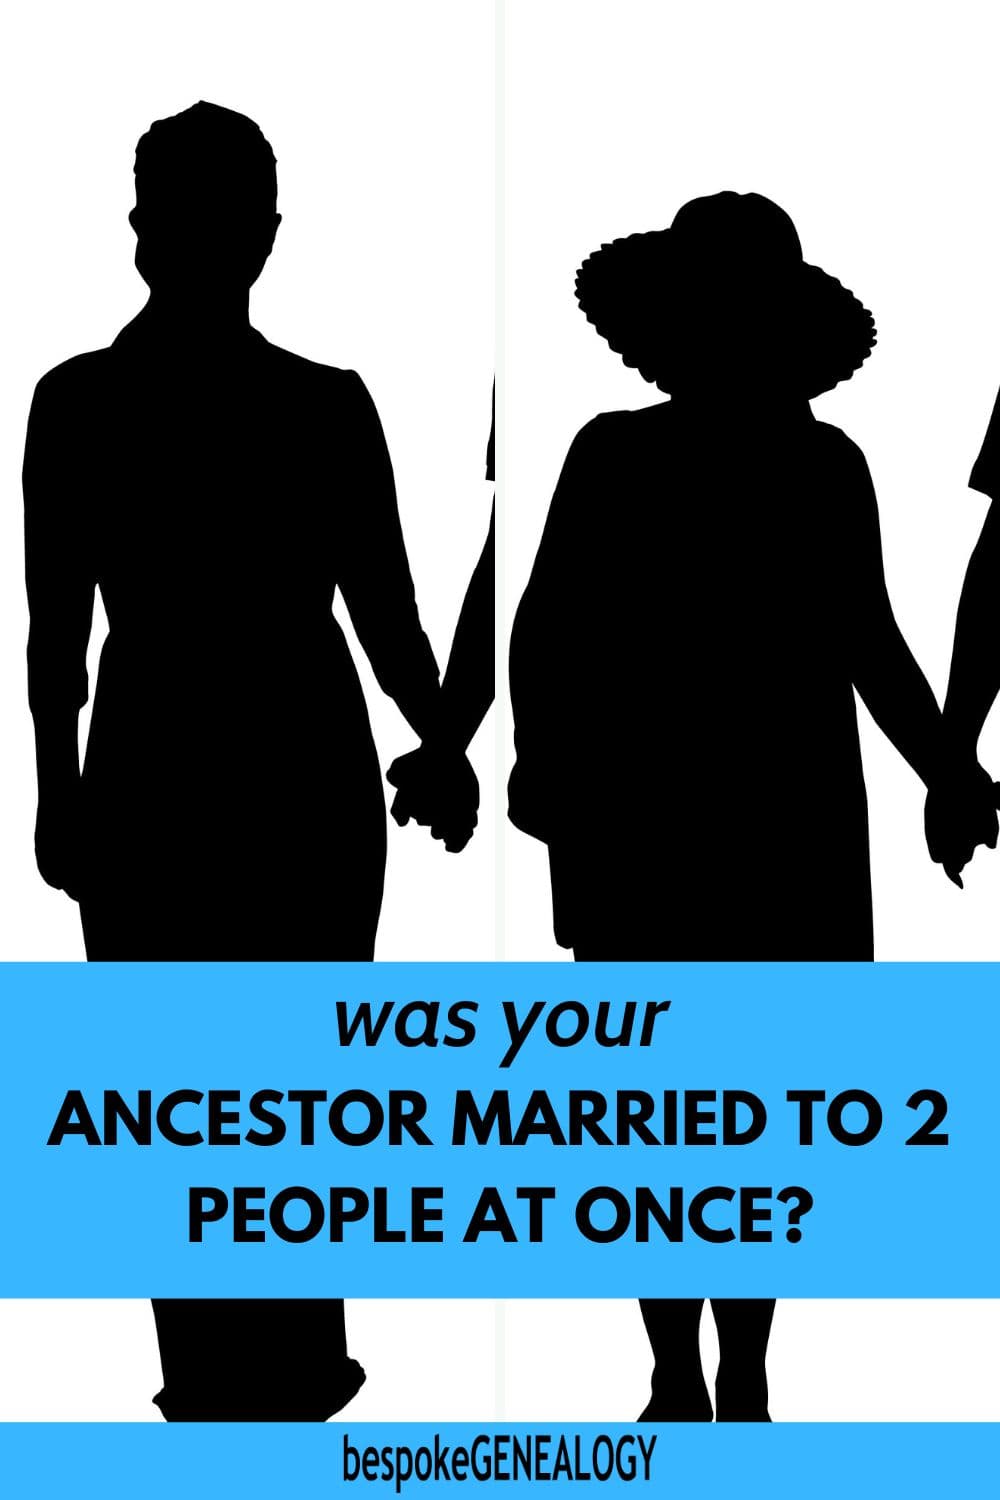 Was your ancestor married to 2 people at once? Silhouettes of 2 women each holding the hand of someone.